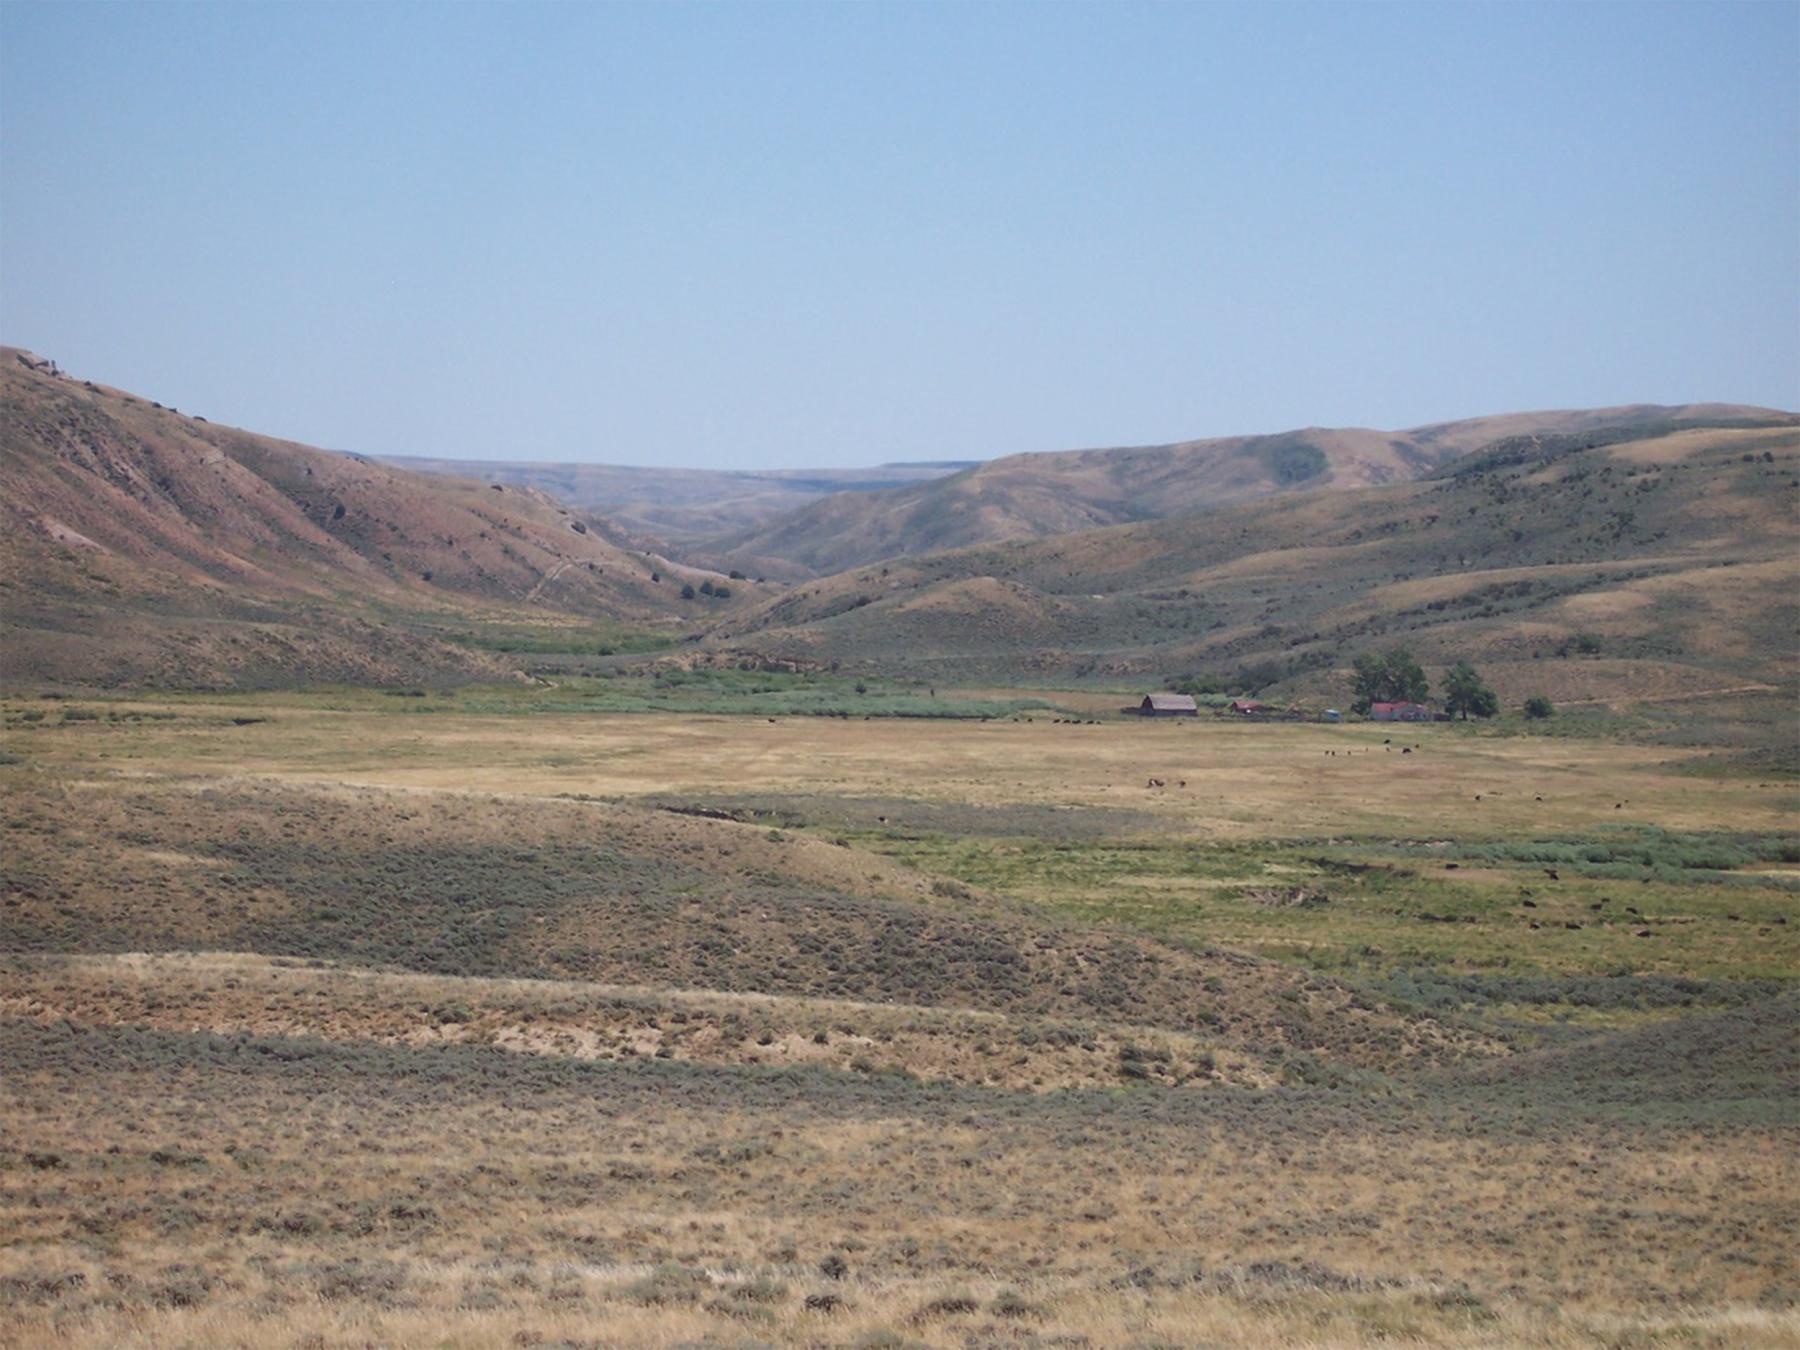 A view of Muddy Creek Canyon looking east. The Overland Trail emerged from the canyon here and continued west. The Rawlins to Baggs Road crossed the photo from left to right, passing the Sulphur Springs Ranch at right. Sulphur Springs was originally an Overland Trail stage station which was repurposed as a cattle and sheep ranch after 1868. It was also a road ranch on the Rawlins to Baggs Road. Western Archaeological Services.